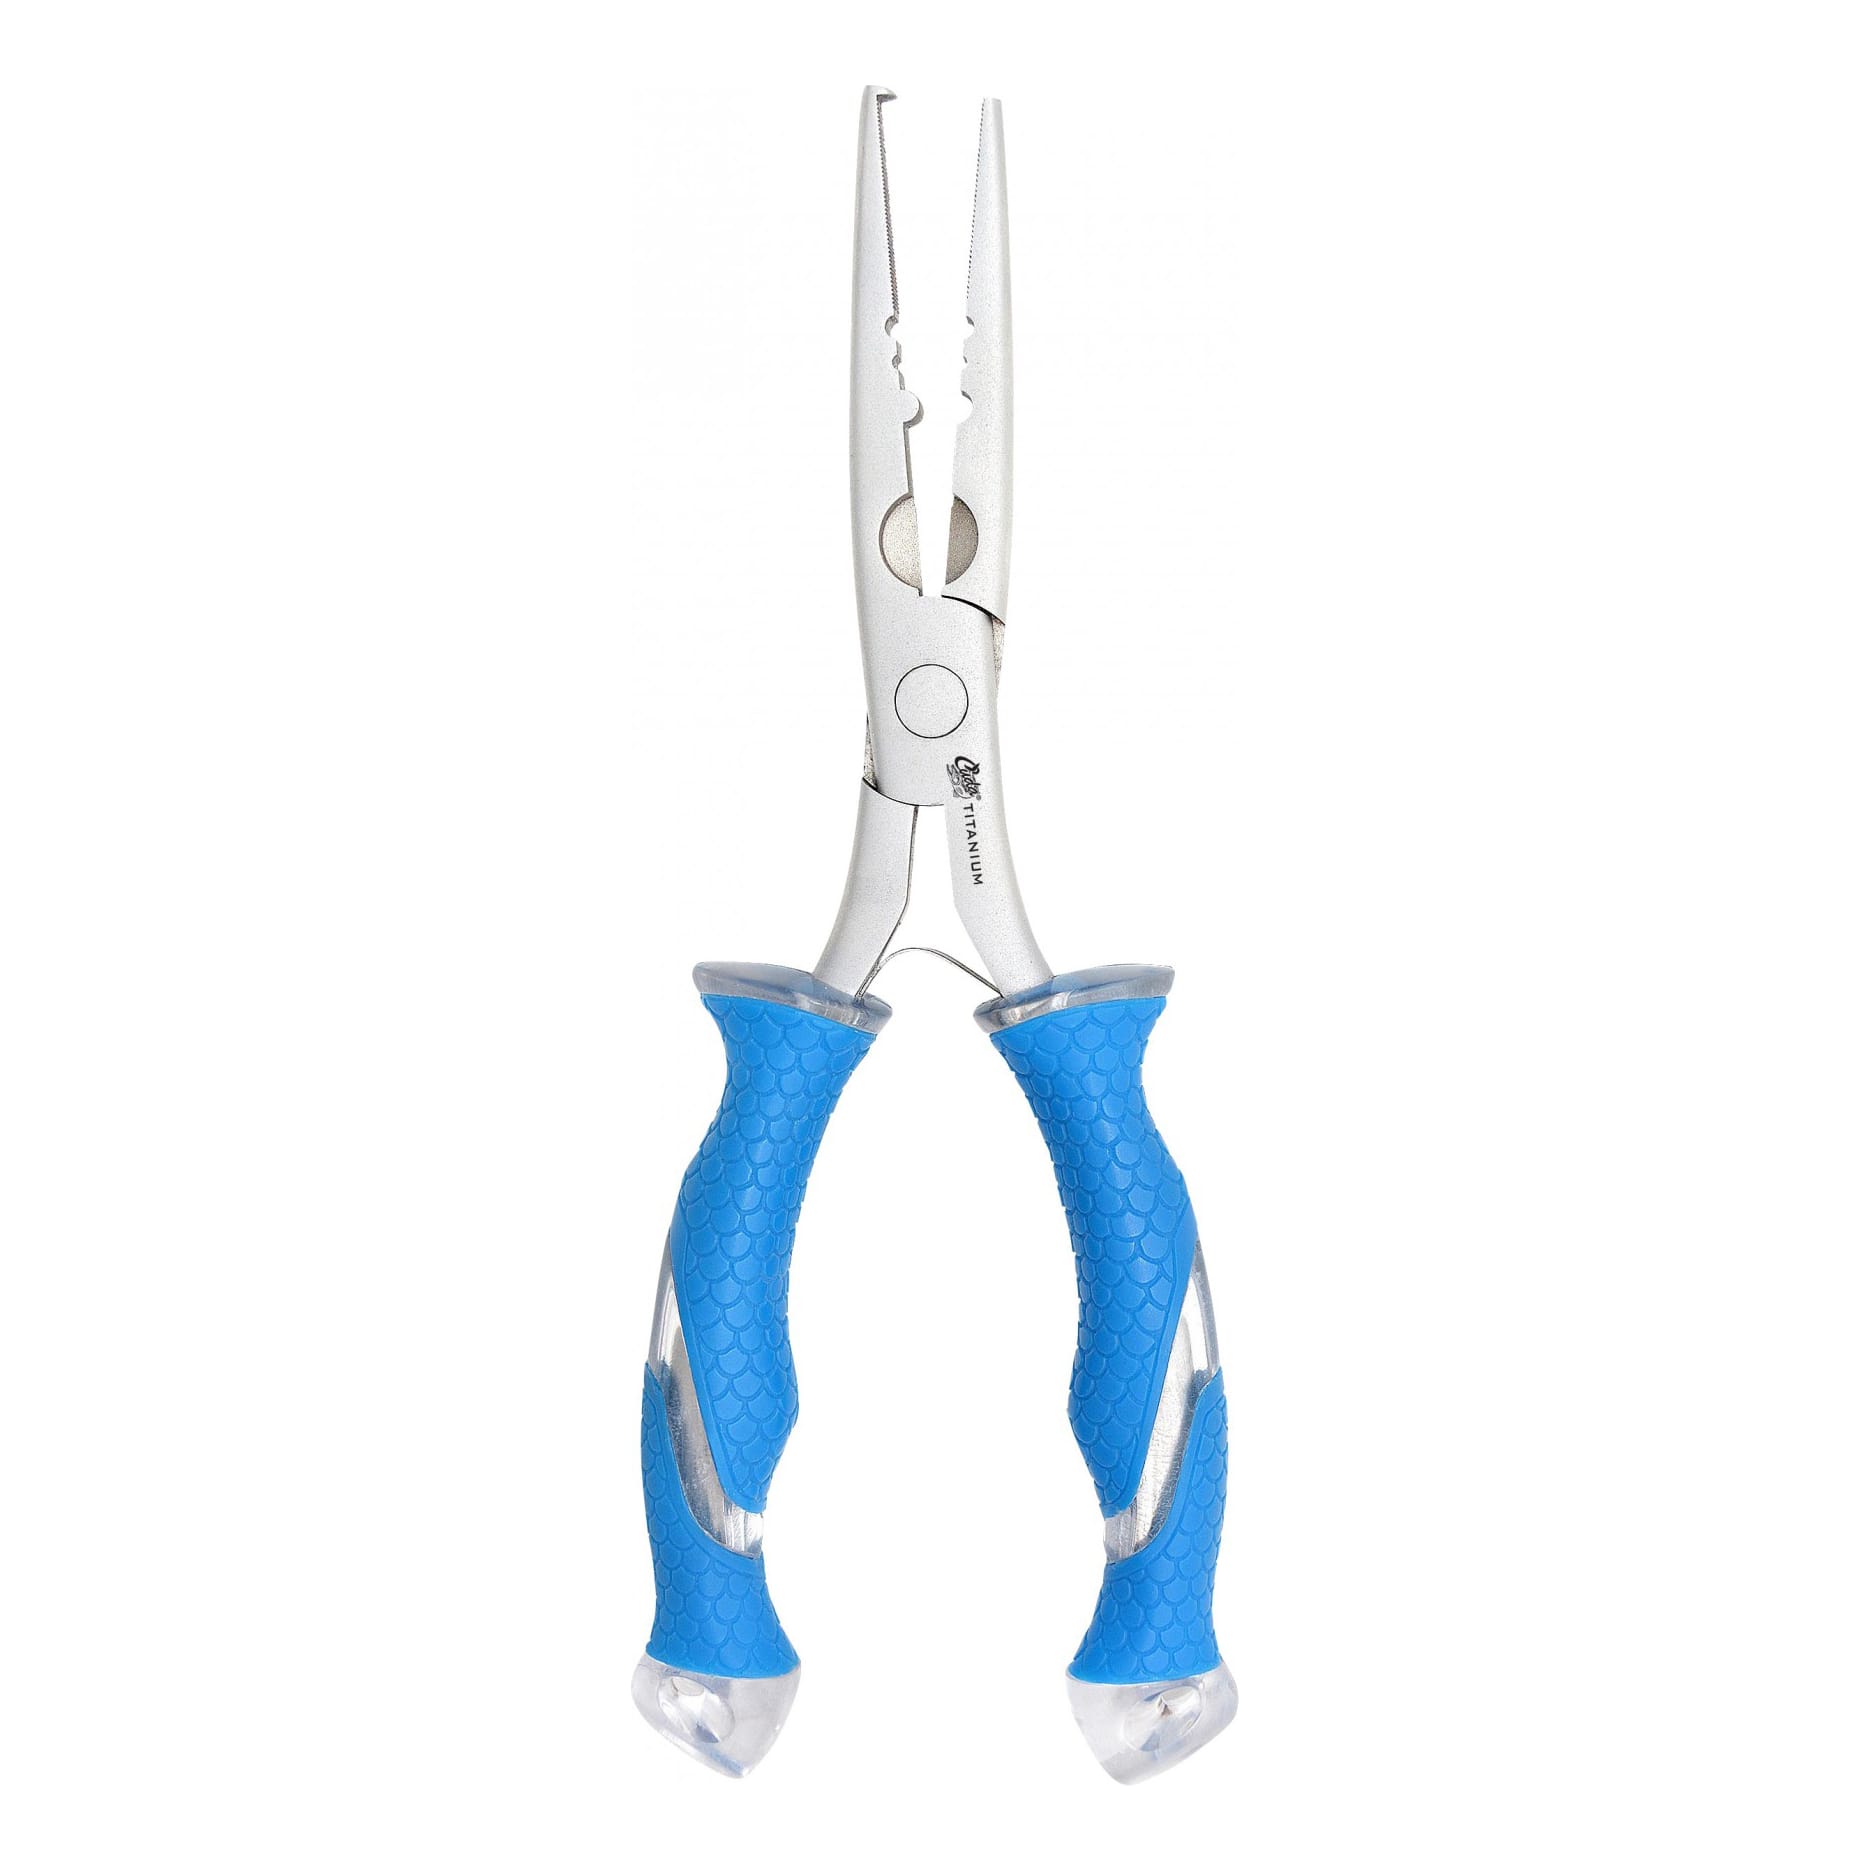 Cuda® 8 Titanium Bonded Stainless Steel Freshwater Plier with